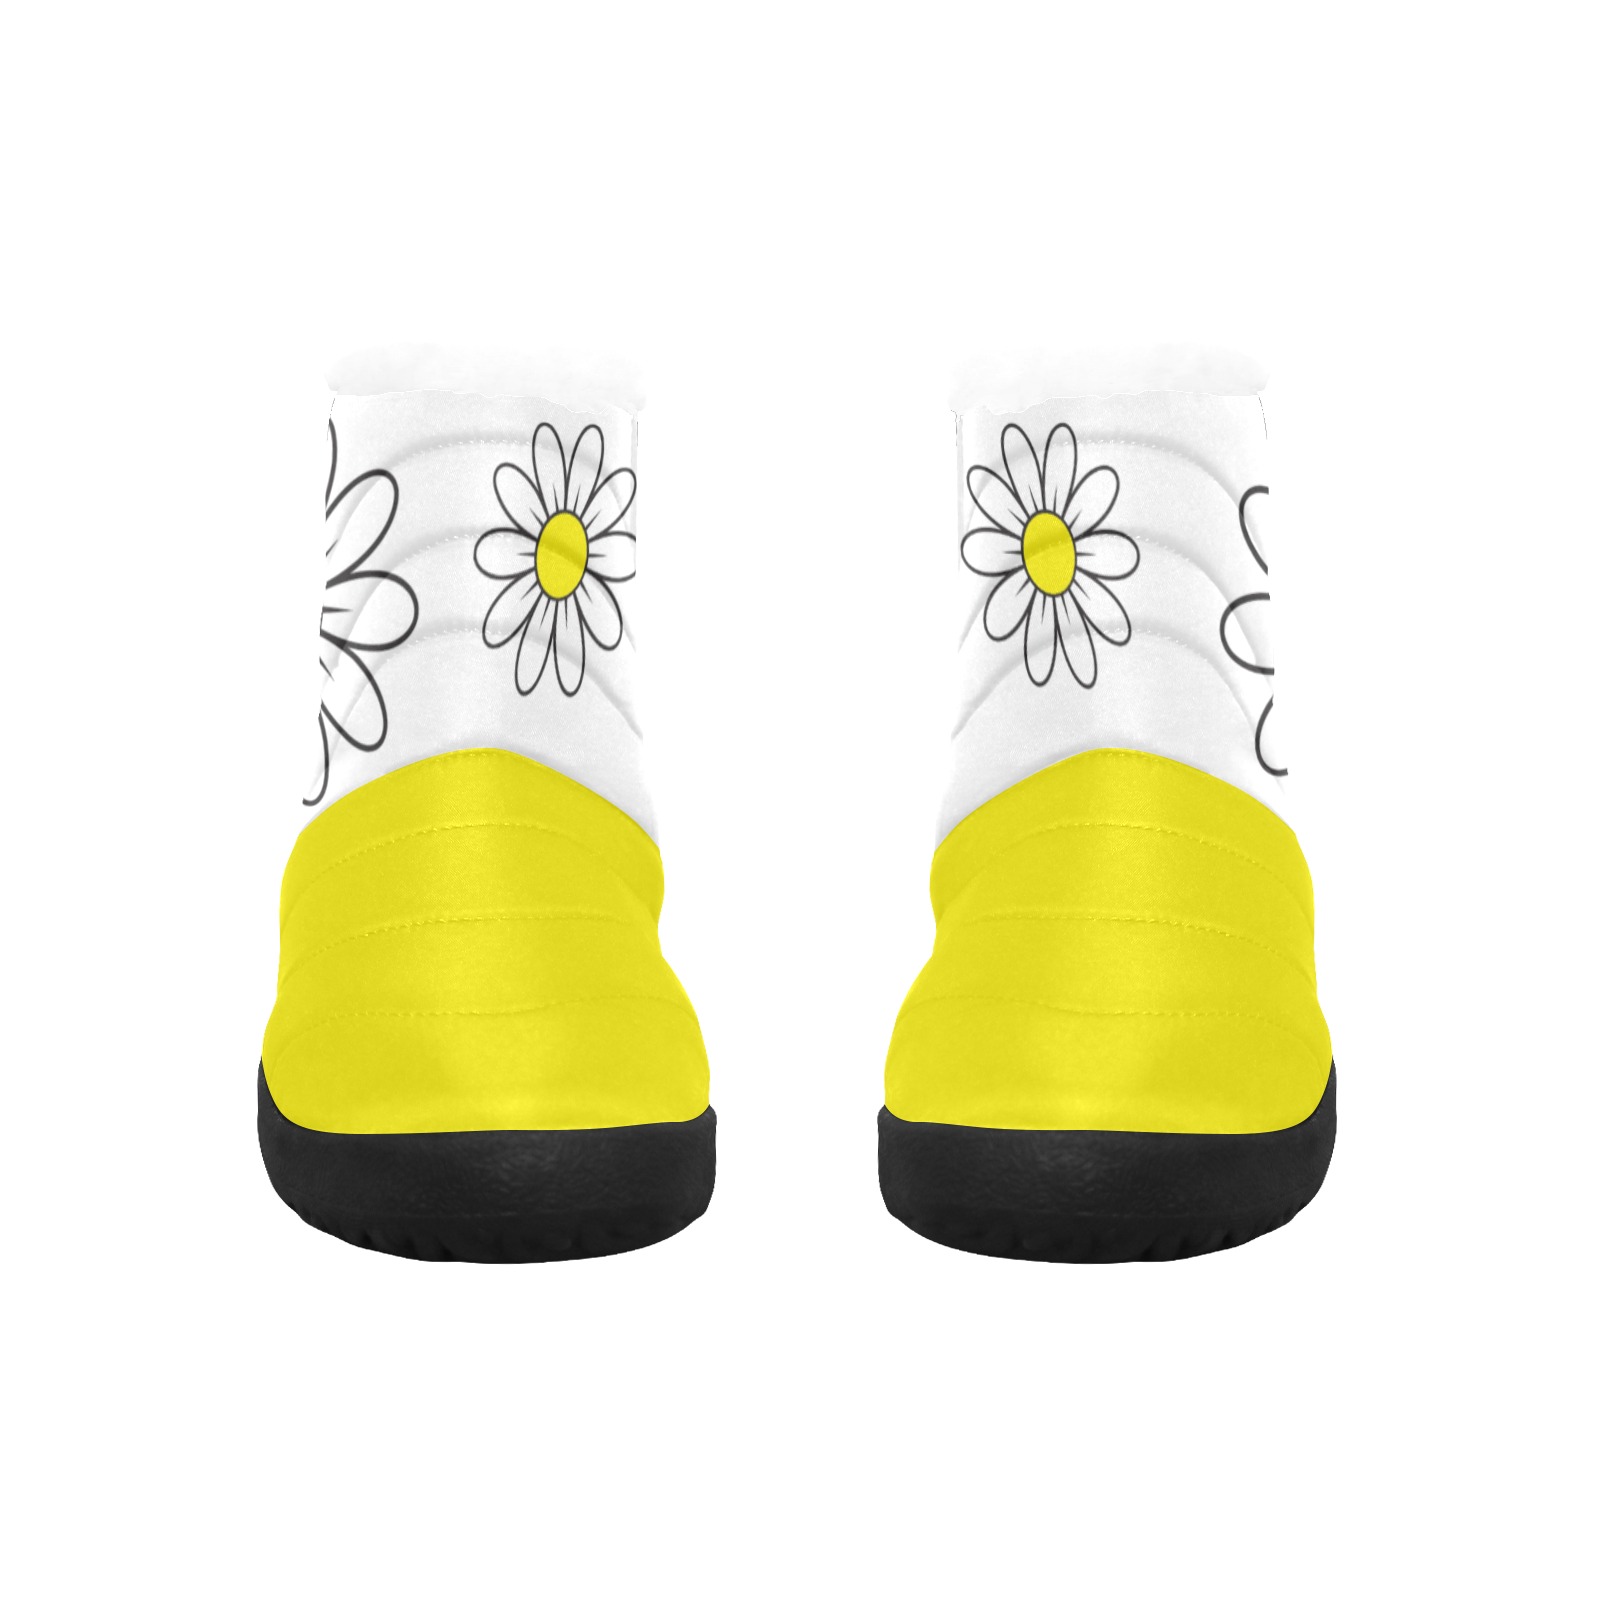 Daisy and yellow Women's Cotton-Padded Shoes (Model 19291)